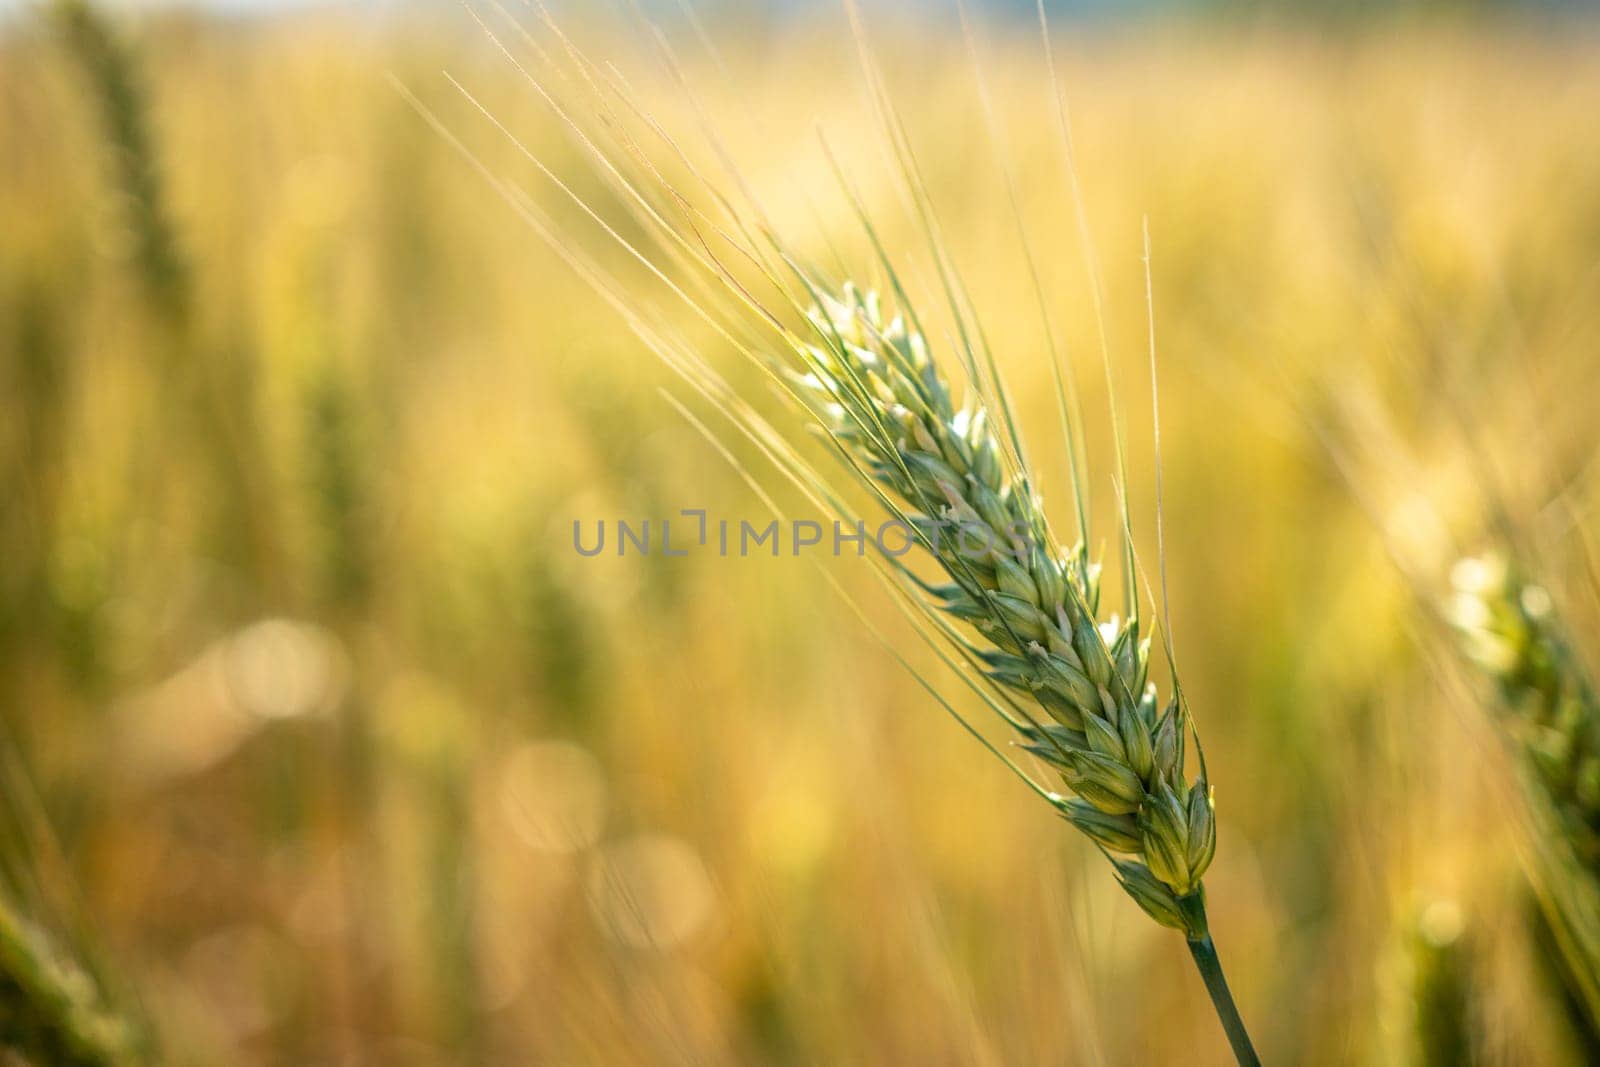 A stalk of wheat is shown in a field. The stalk is tall and slender, with a few leaves at the top. The field is filled with many stalks of wheat, creating a sense of abundance and growth